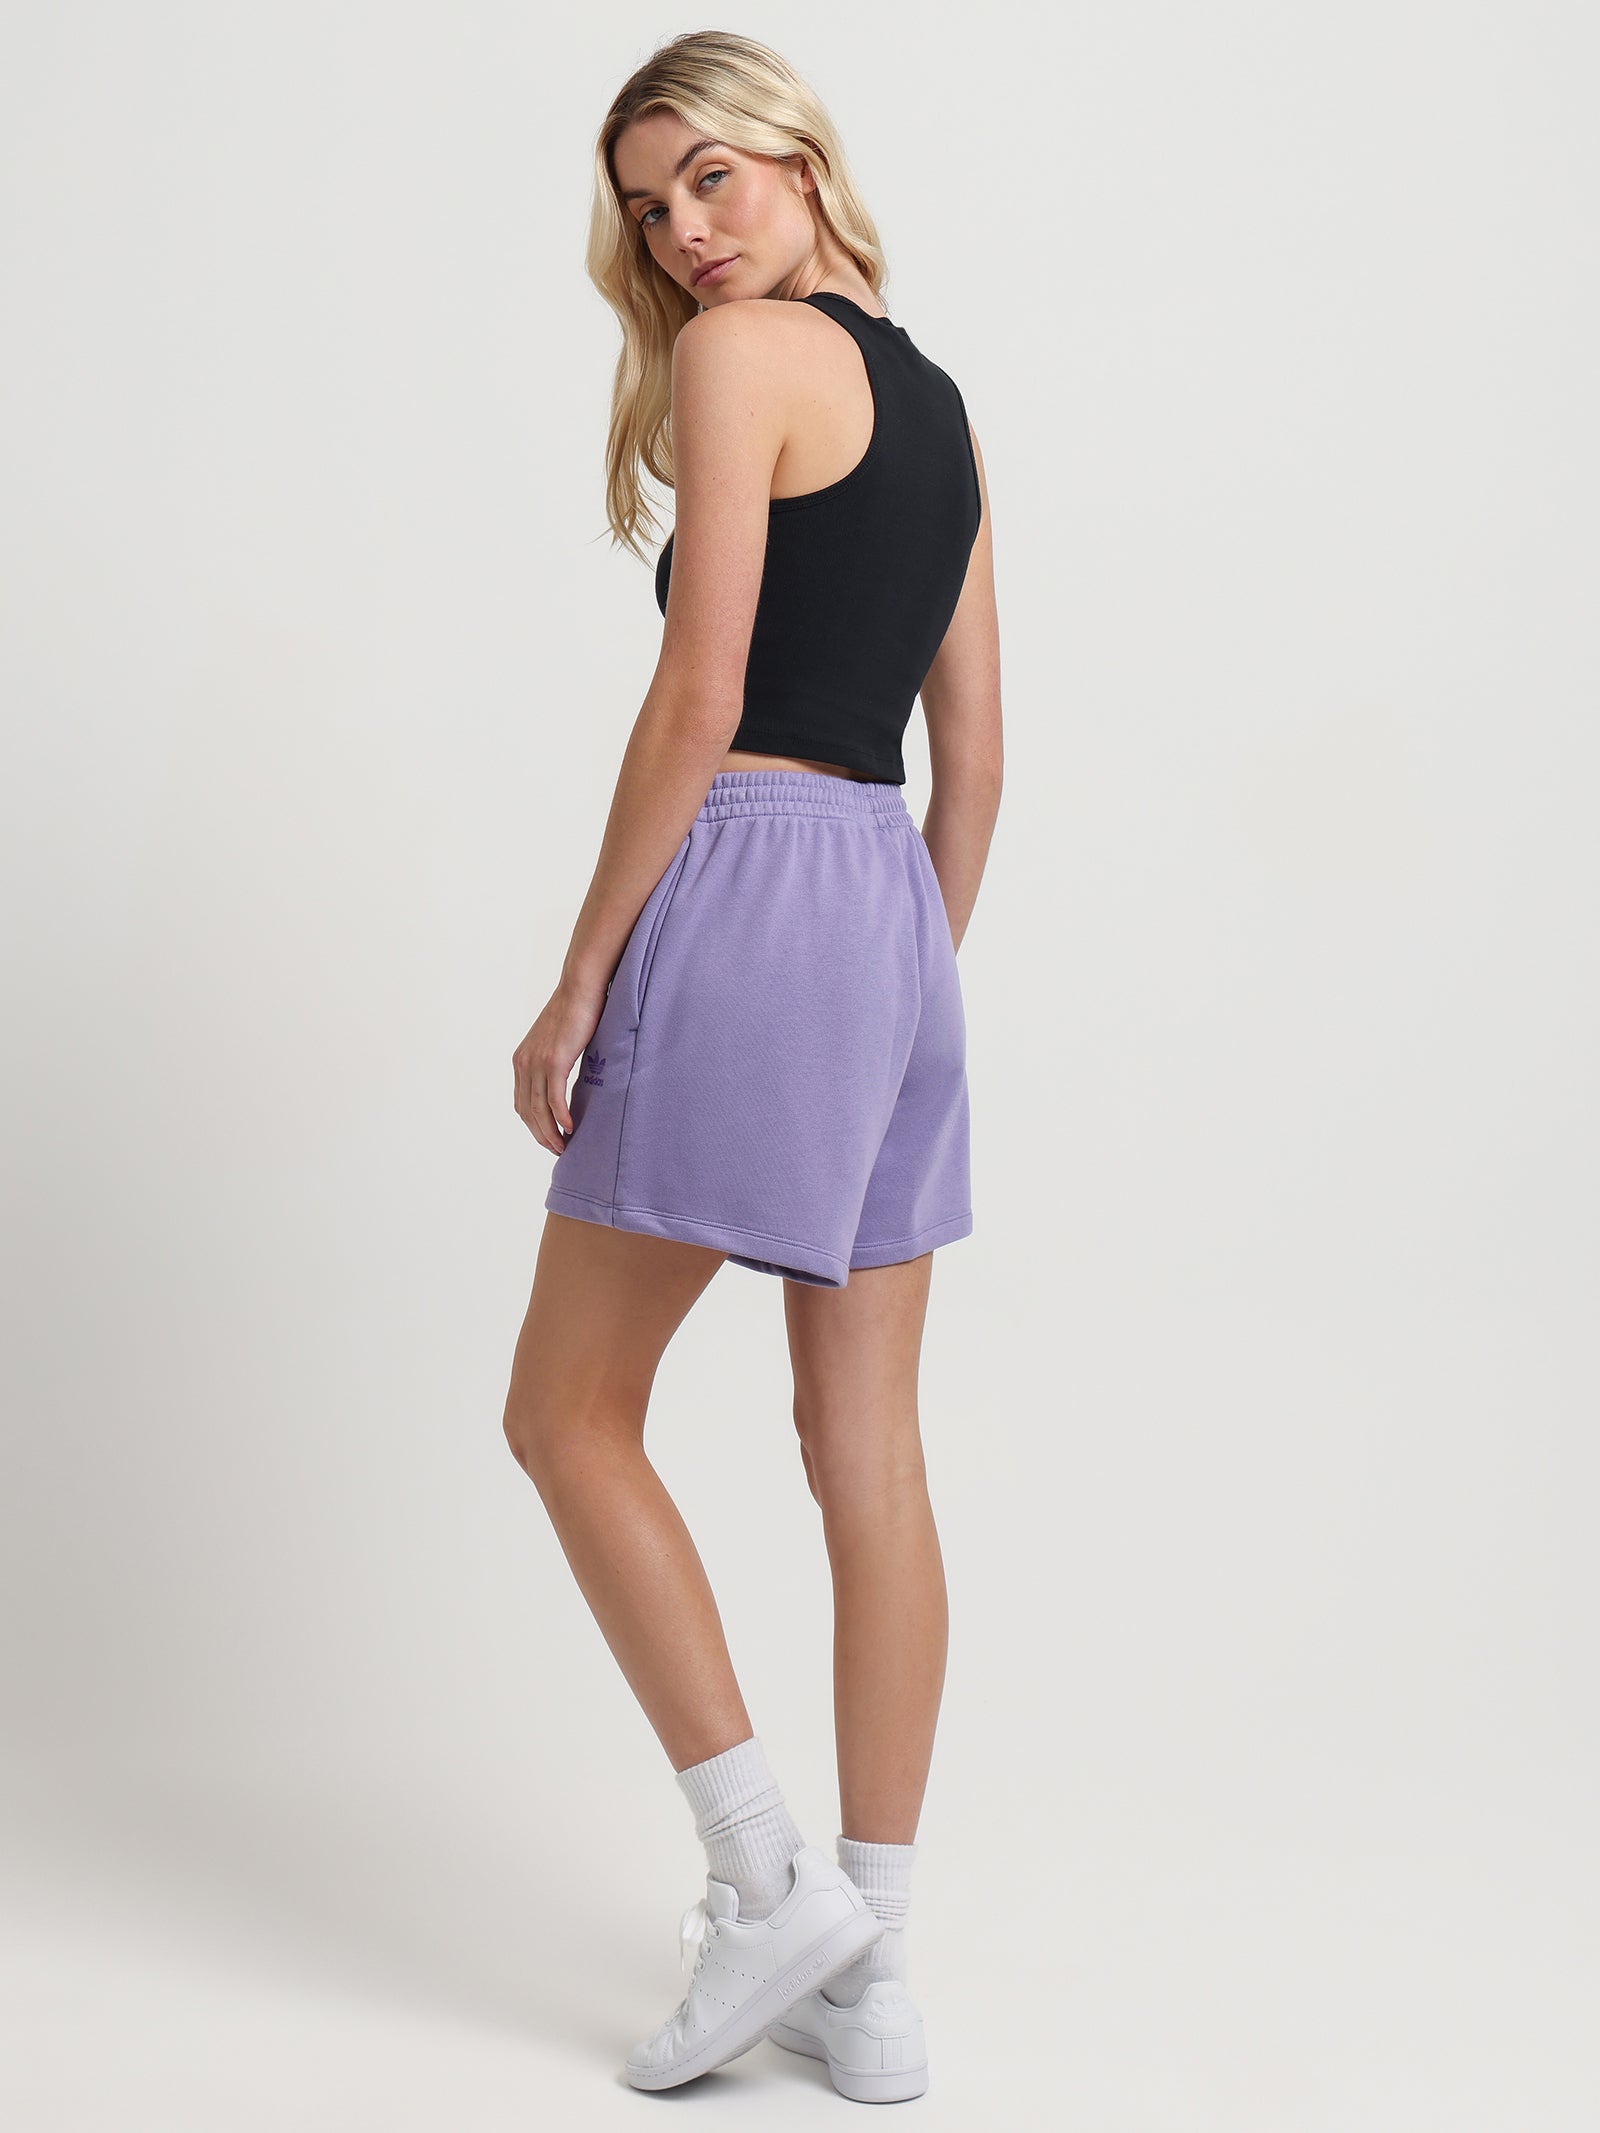 Adicolor Essentials French Magic in Shorts - Store Lilac Glue Terry